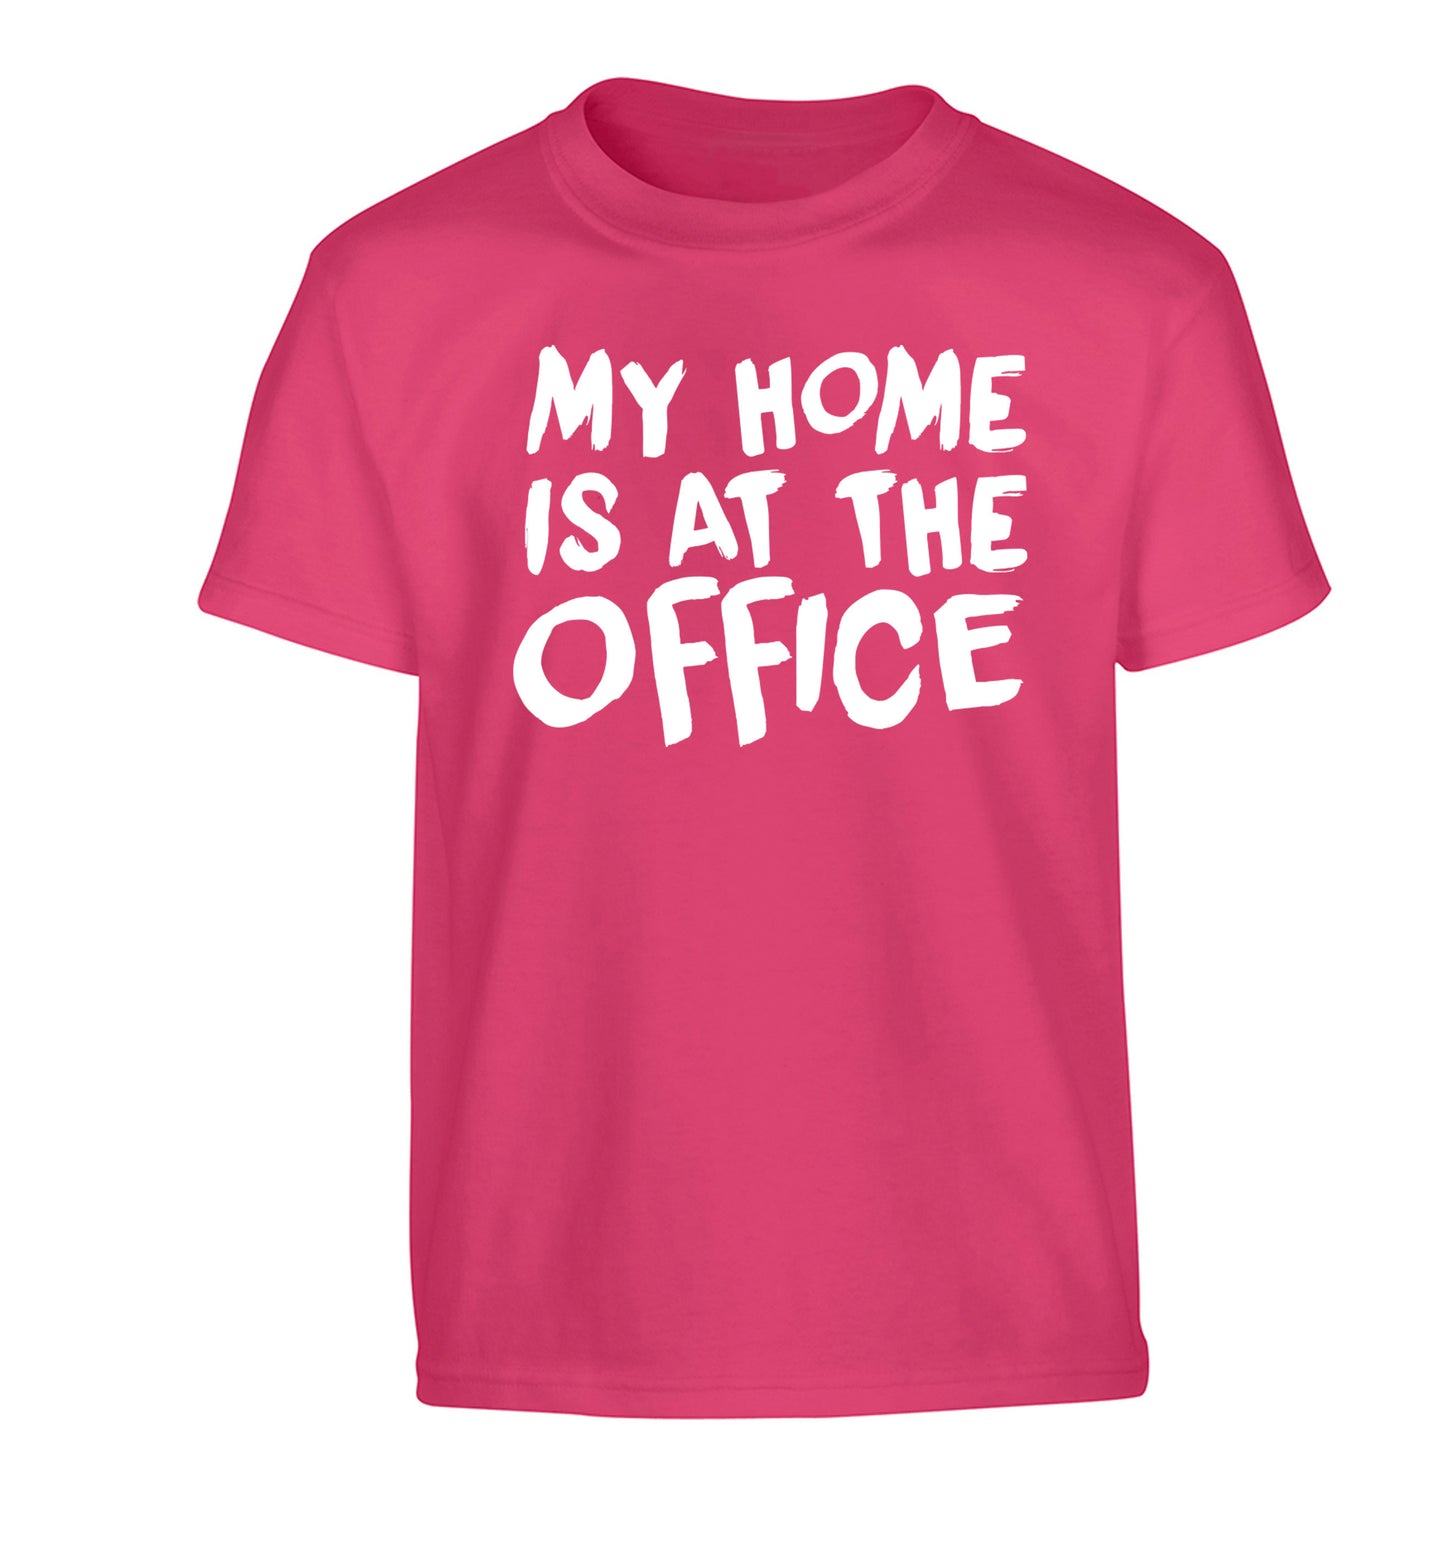 My home is at the office Children's pink Tshirt 12-14 Years